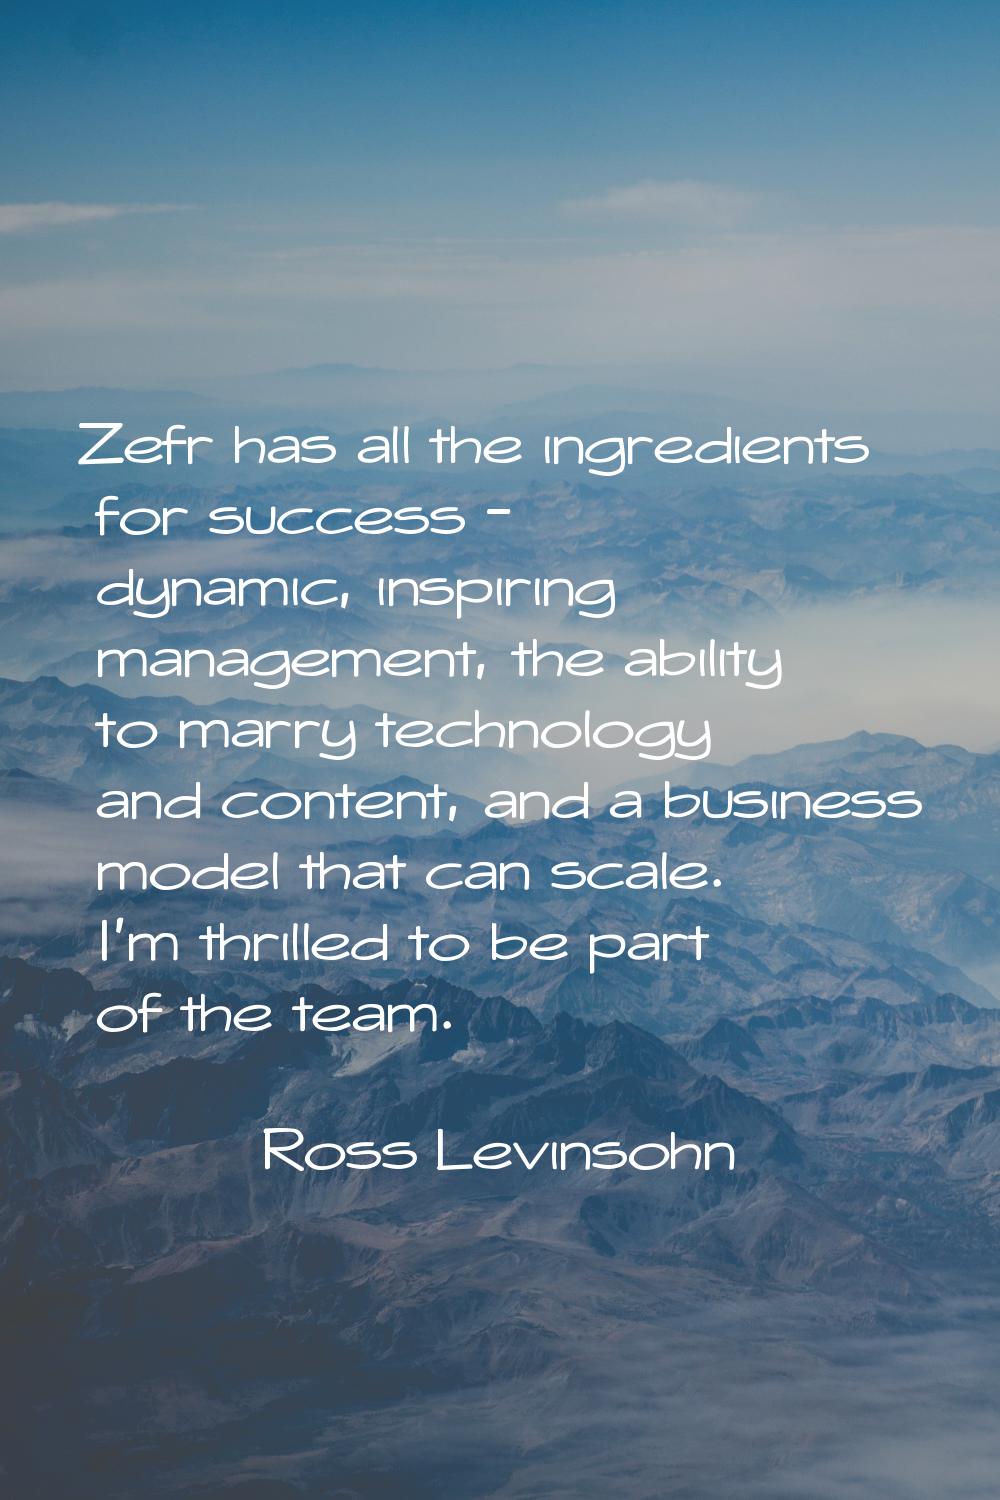 Zefr has all the ingredients for success - dynamic, inspiring management, the ability to marry tech